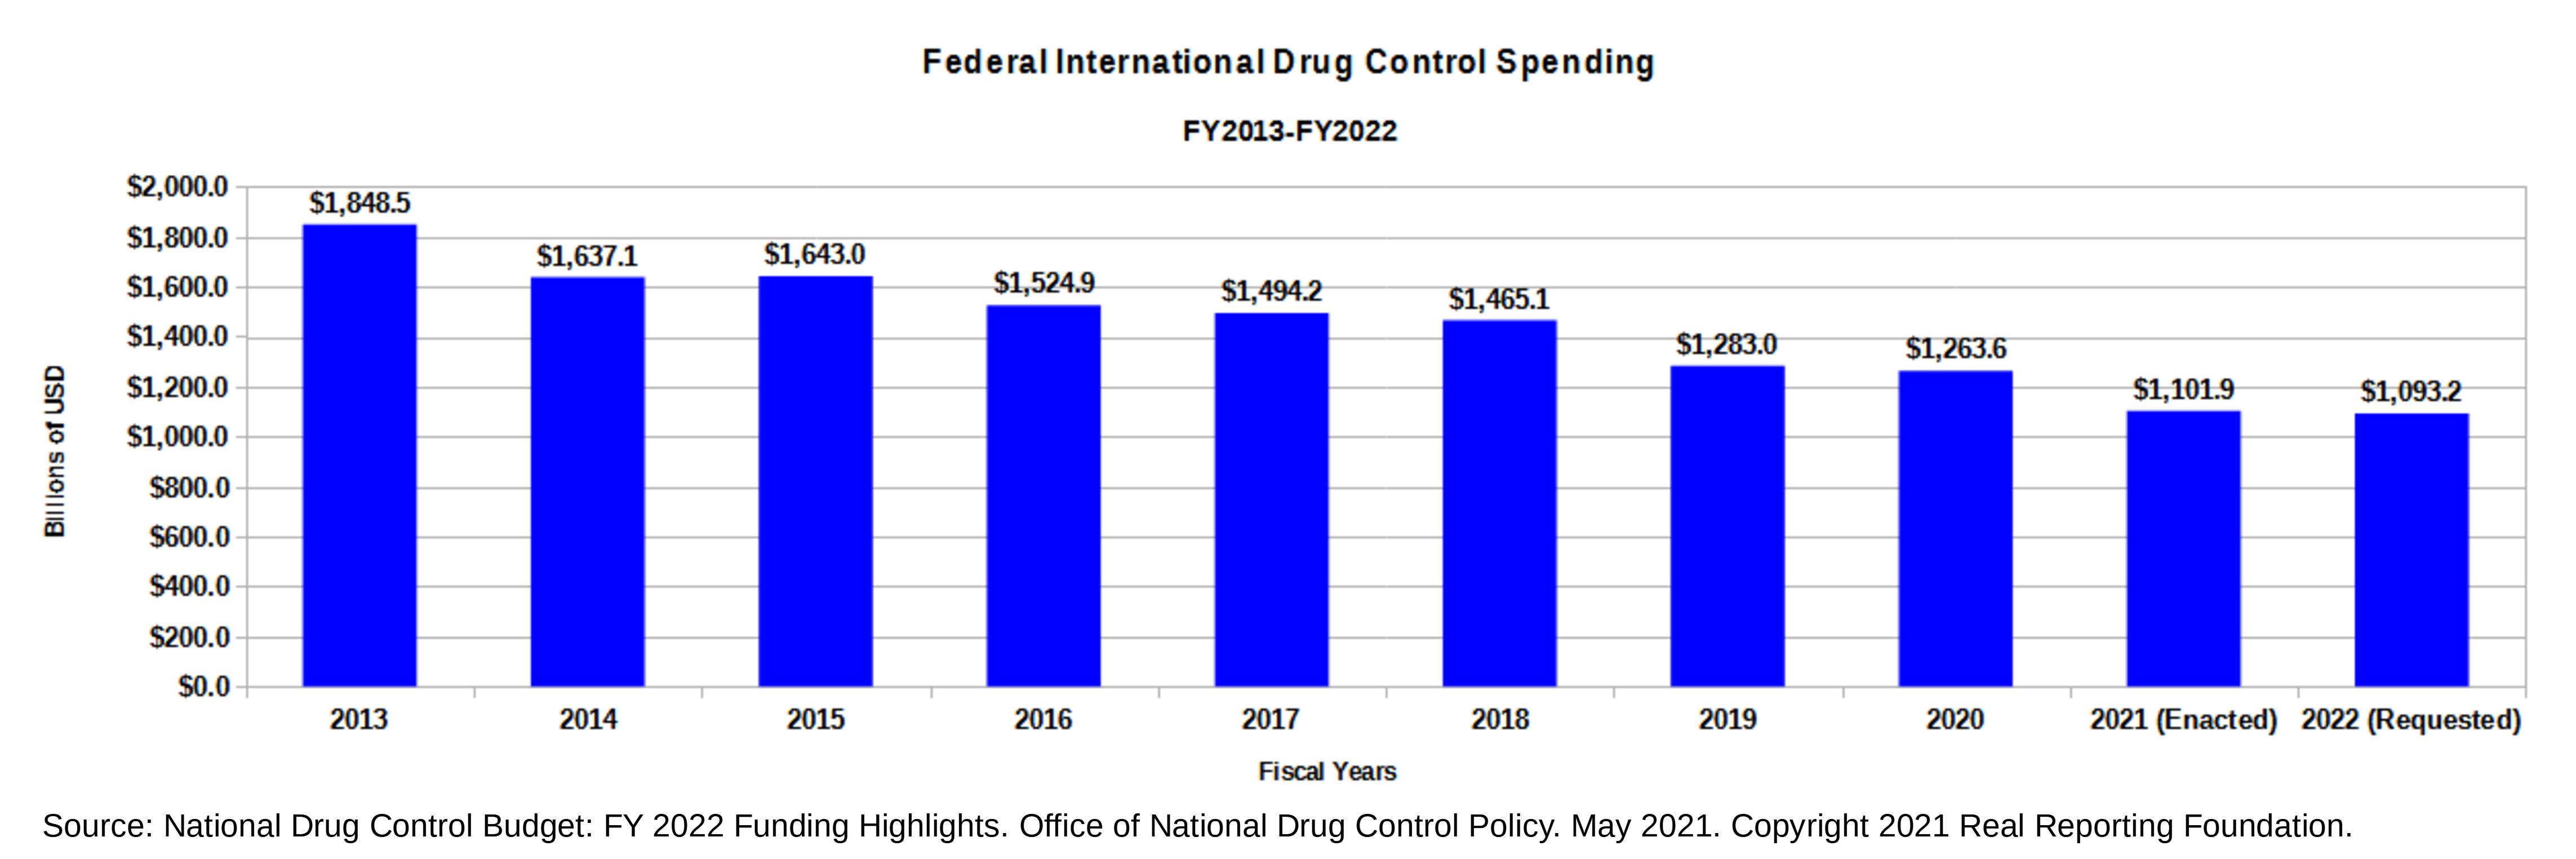 bar graph showing federal drug control spending on international enforcement from FY2013 through FY2022